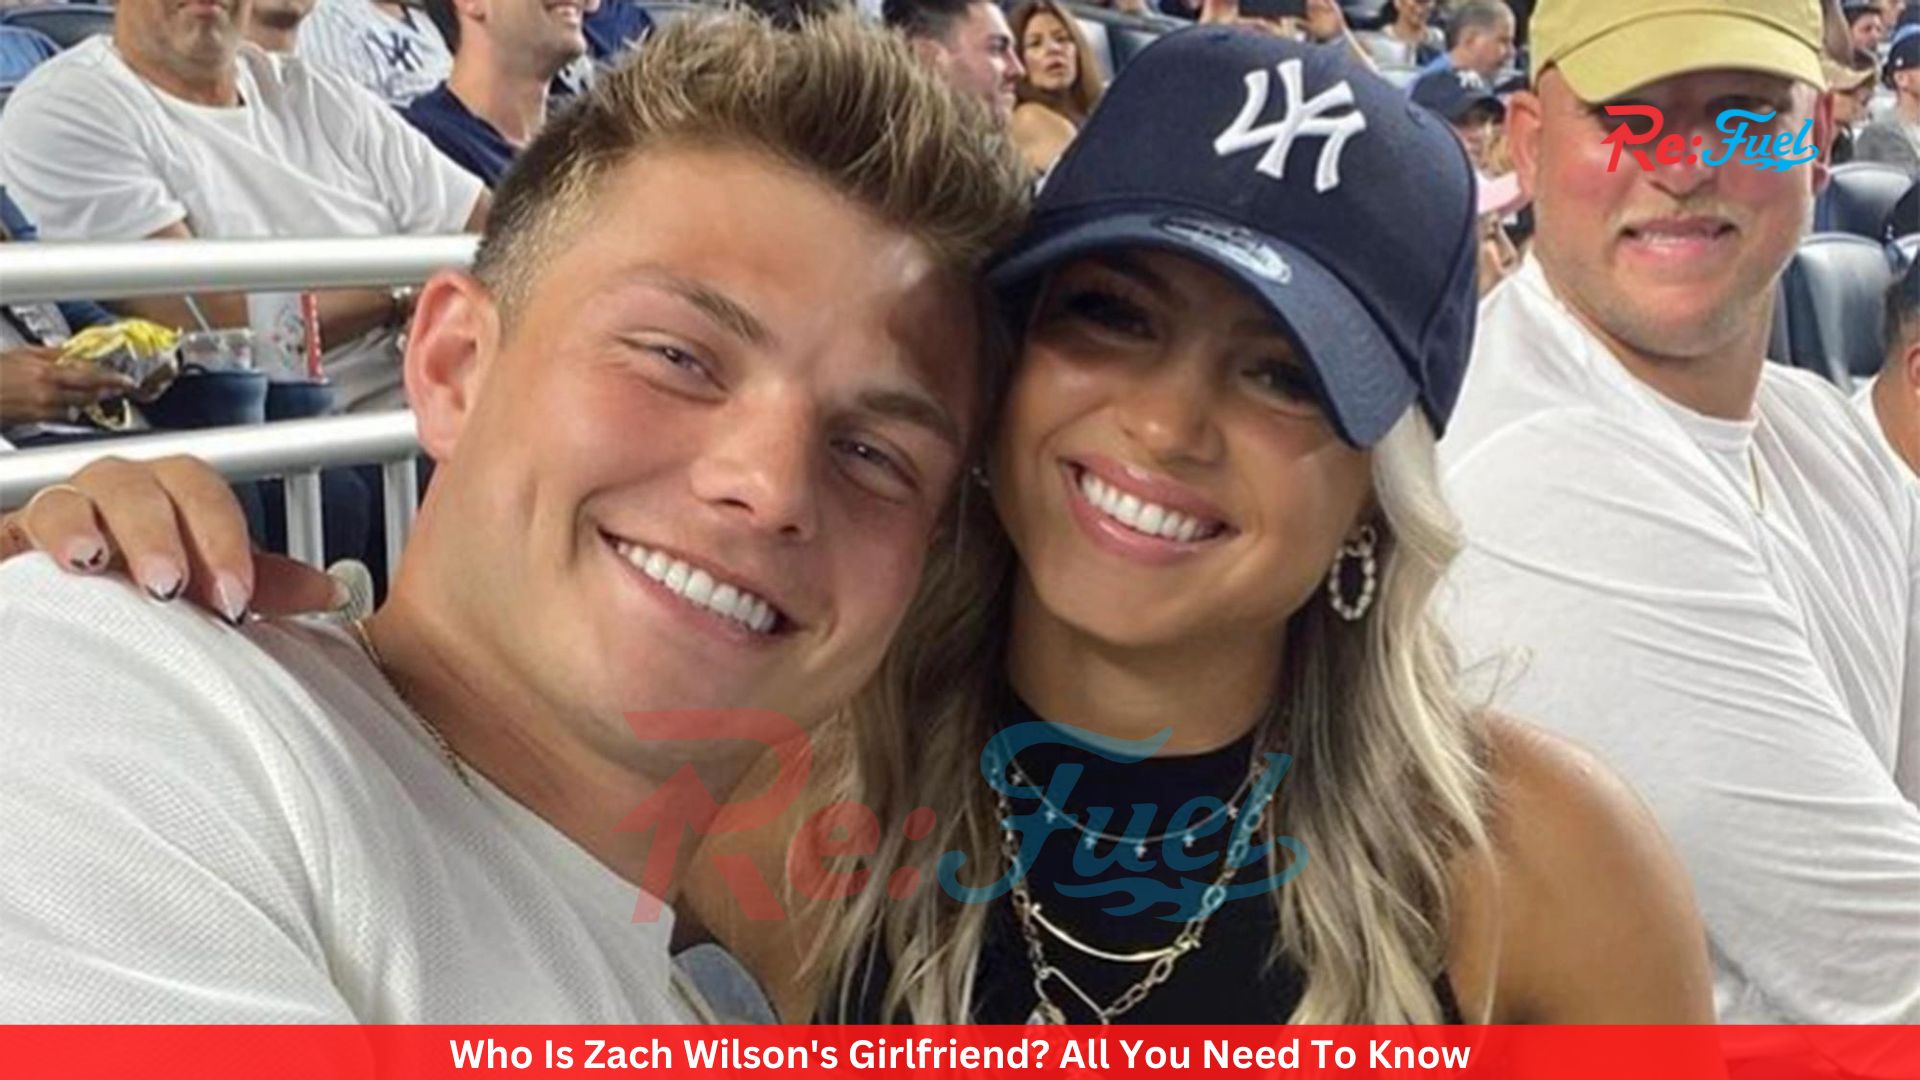 Who Is Zach Wilson's Girlfriend? All You Need To Know